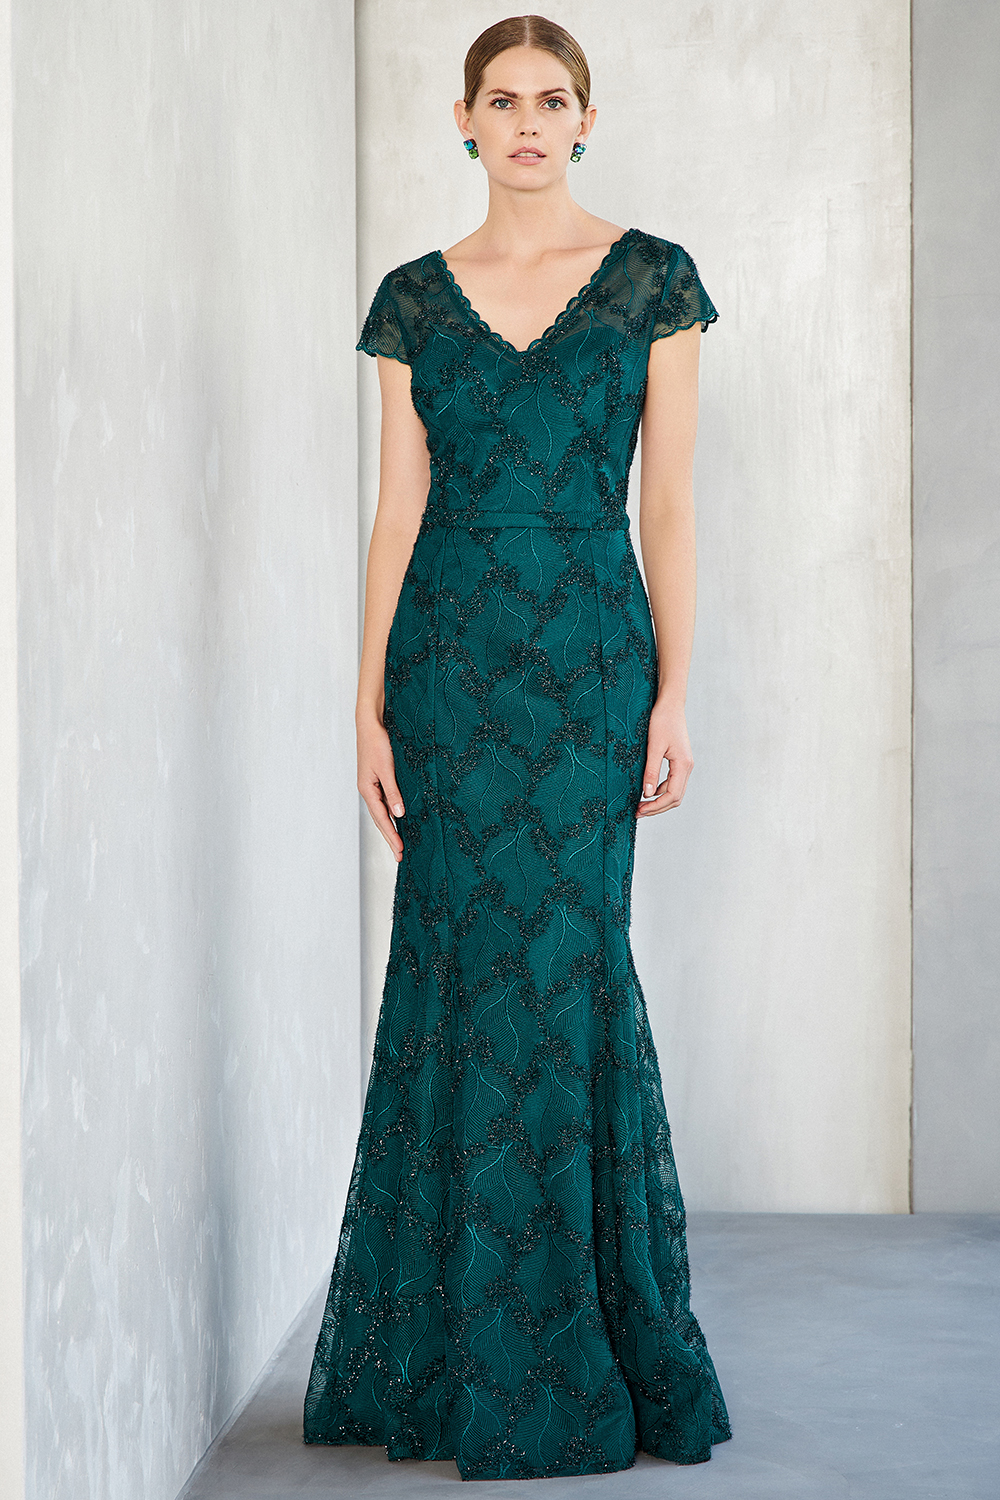 Classic Dresses / Long evening fully beaded dress with short sleeves